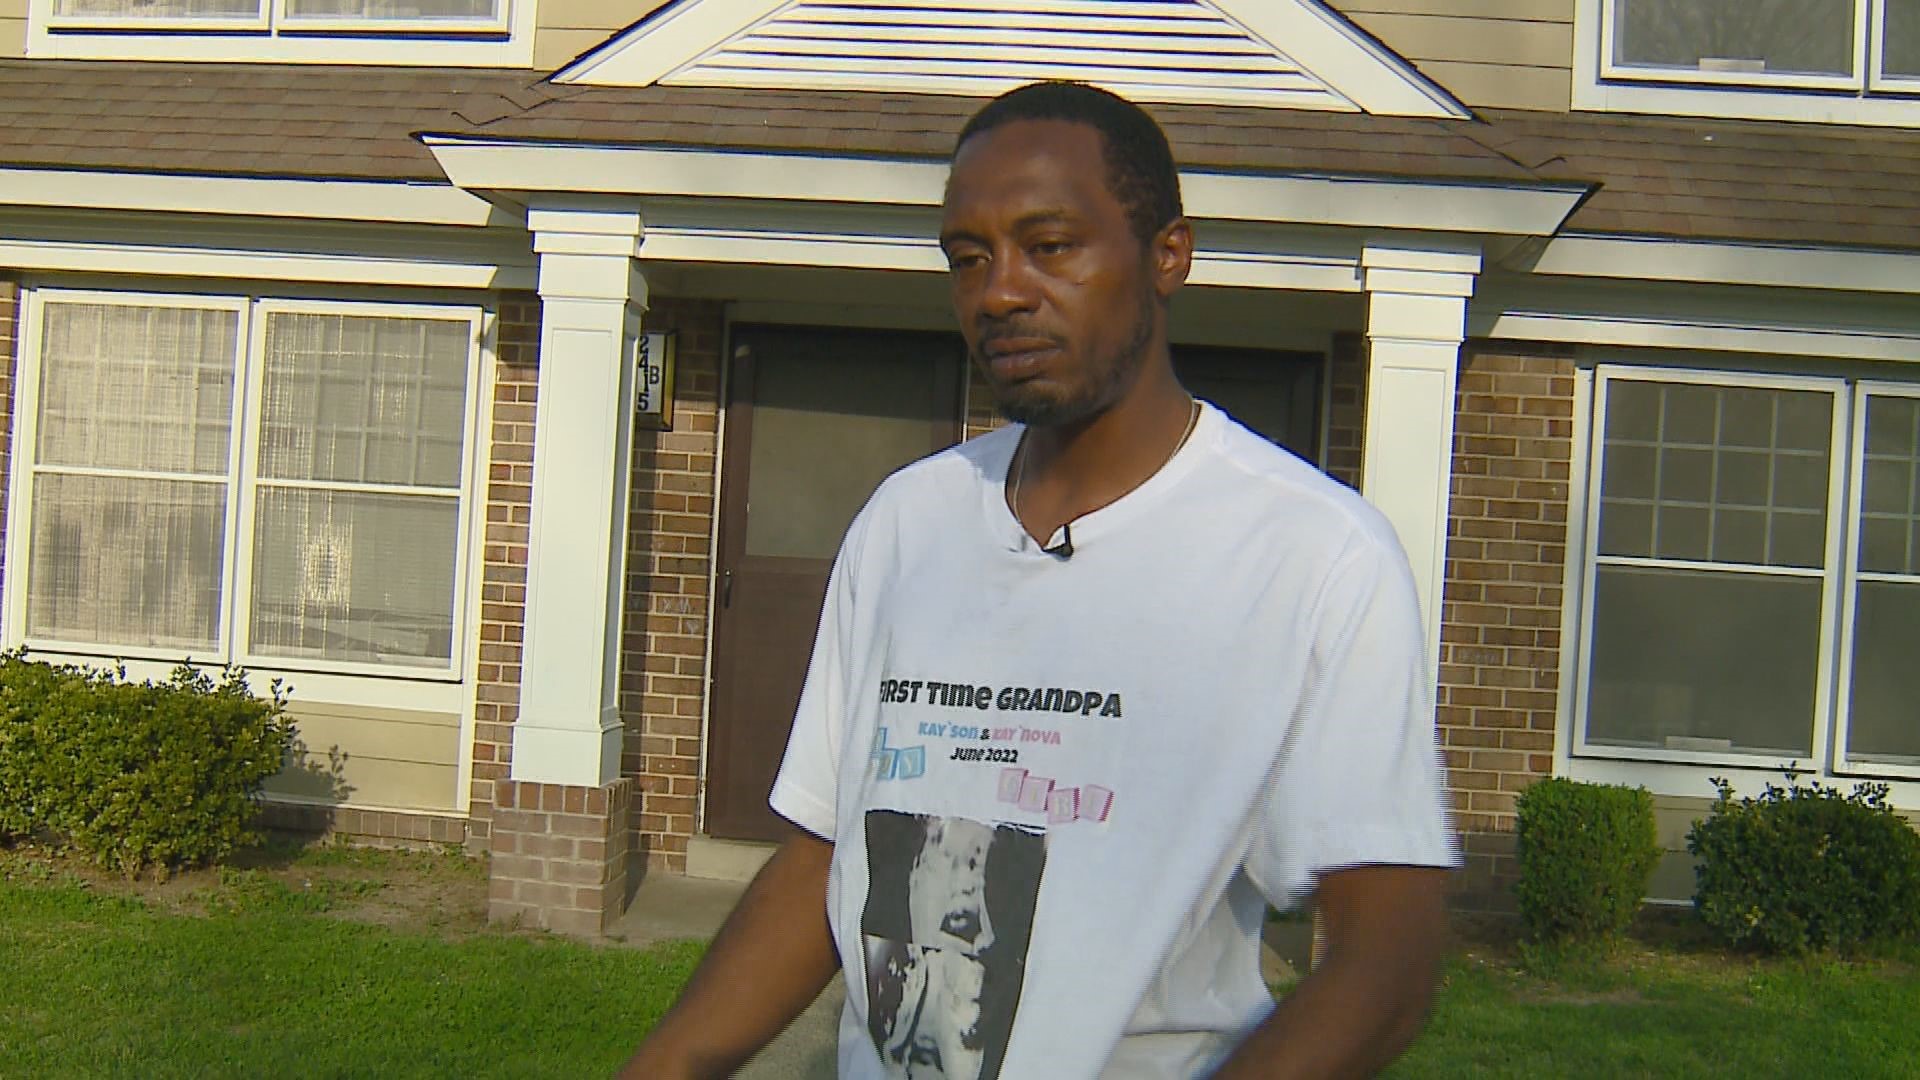 Greensboro police said Deon Monk shot two people before taking his son.